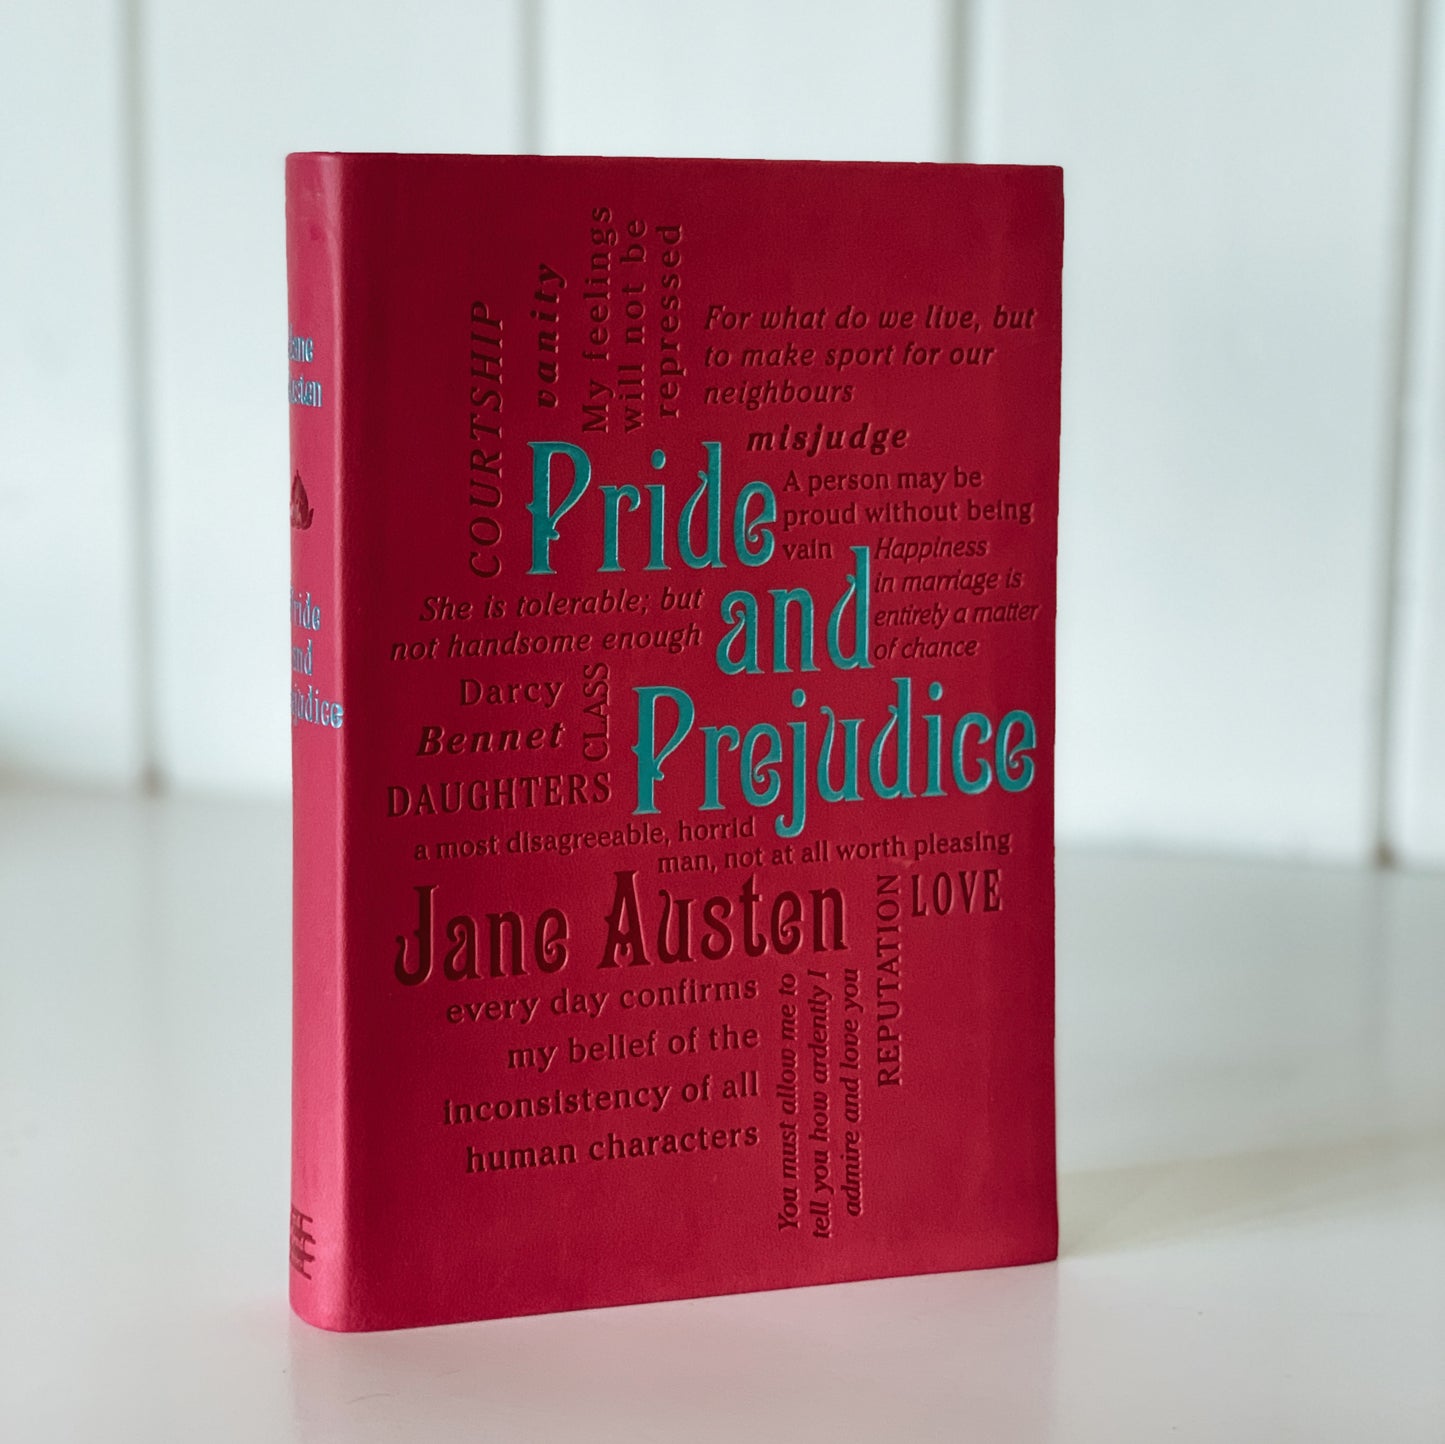 Pride and Prejudice, Jane Austen, Word Cloud Classics Edition, Pink Flexible Cover Edition, 2012